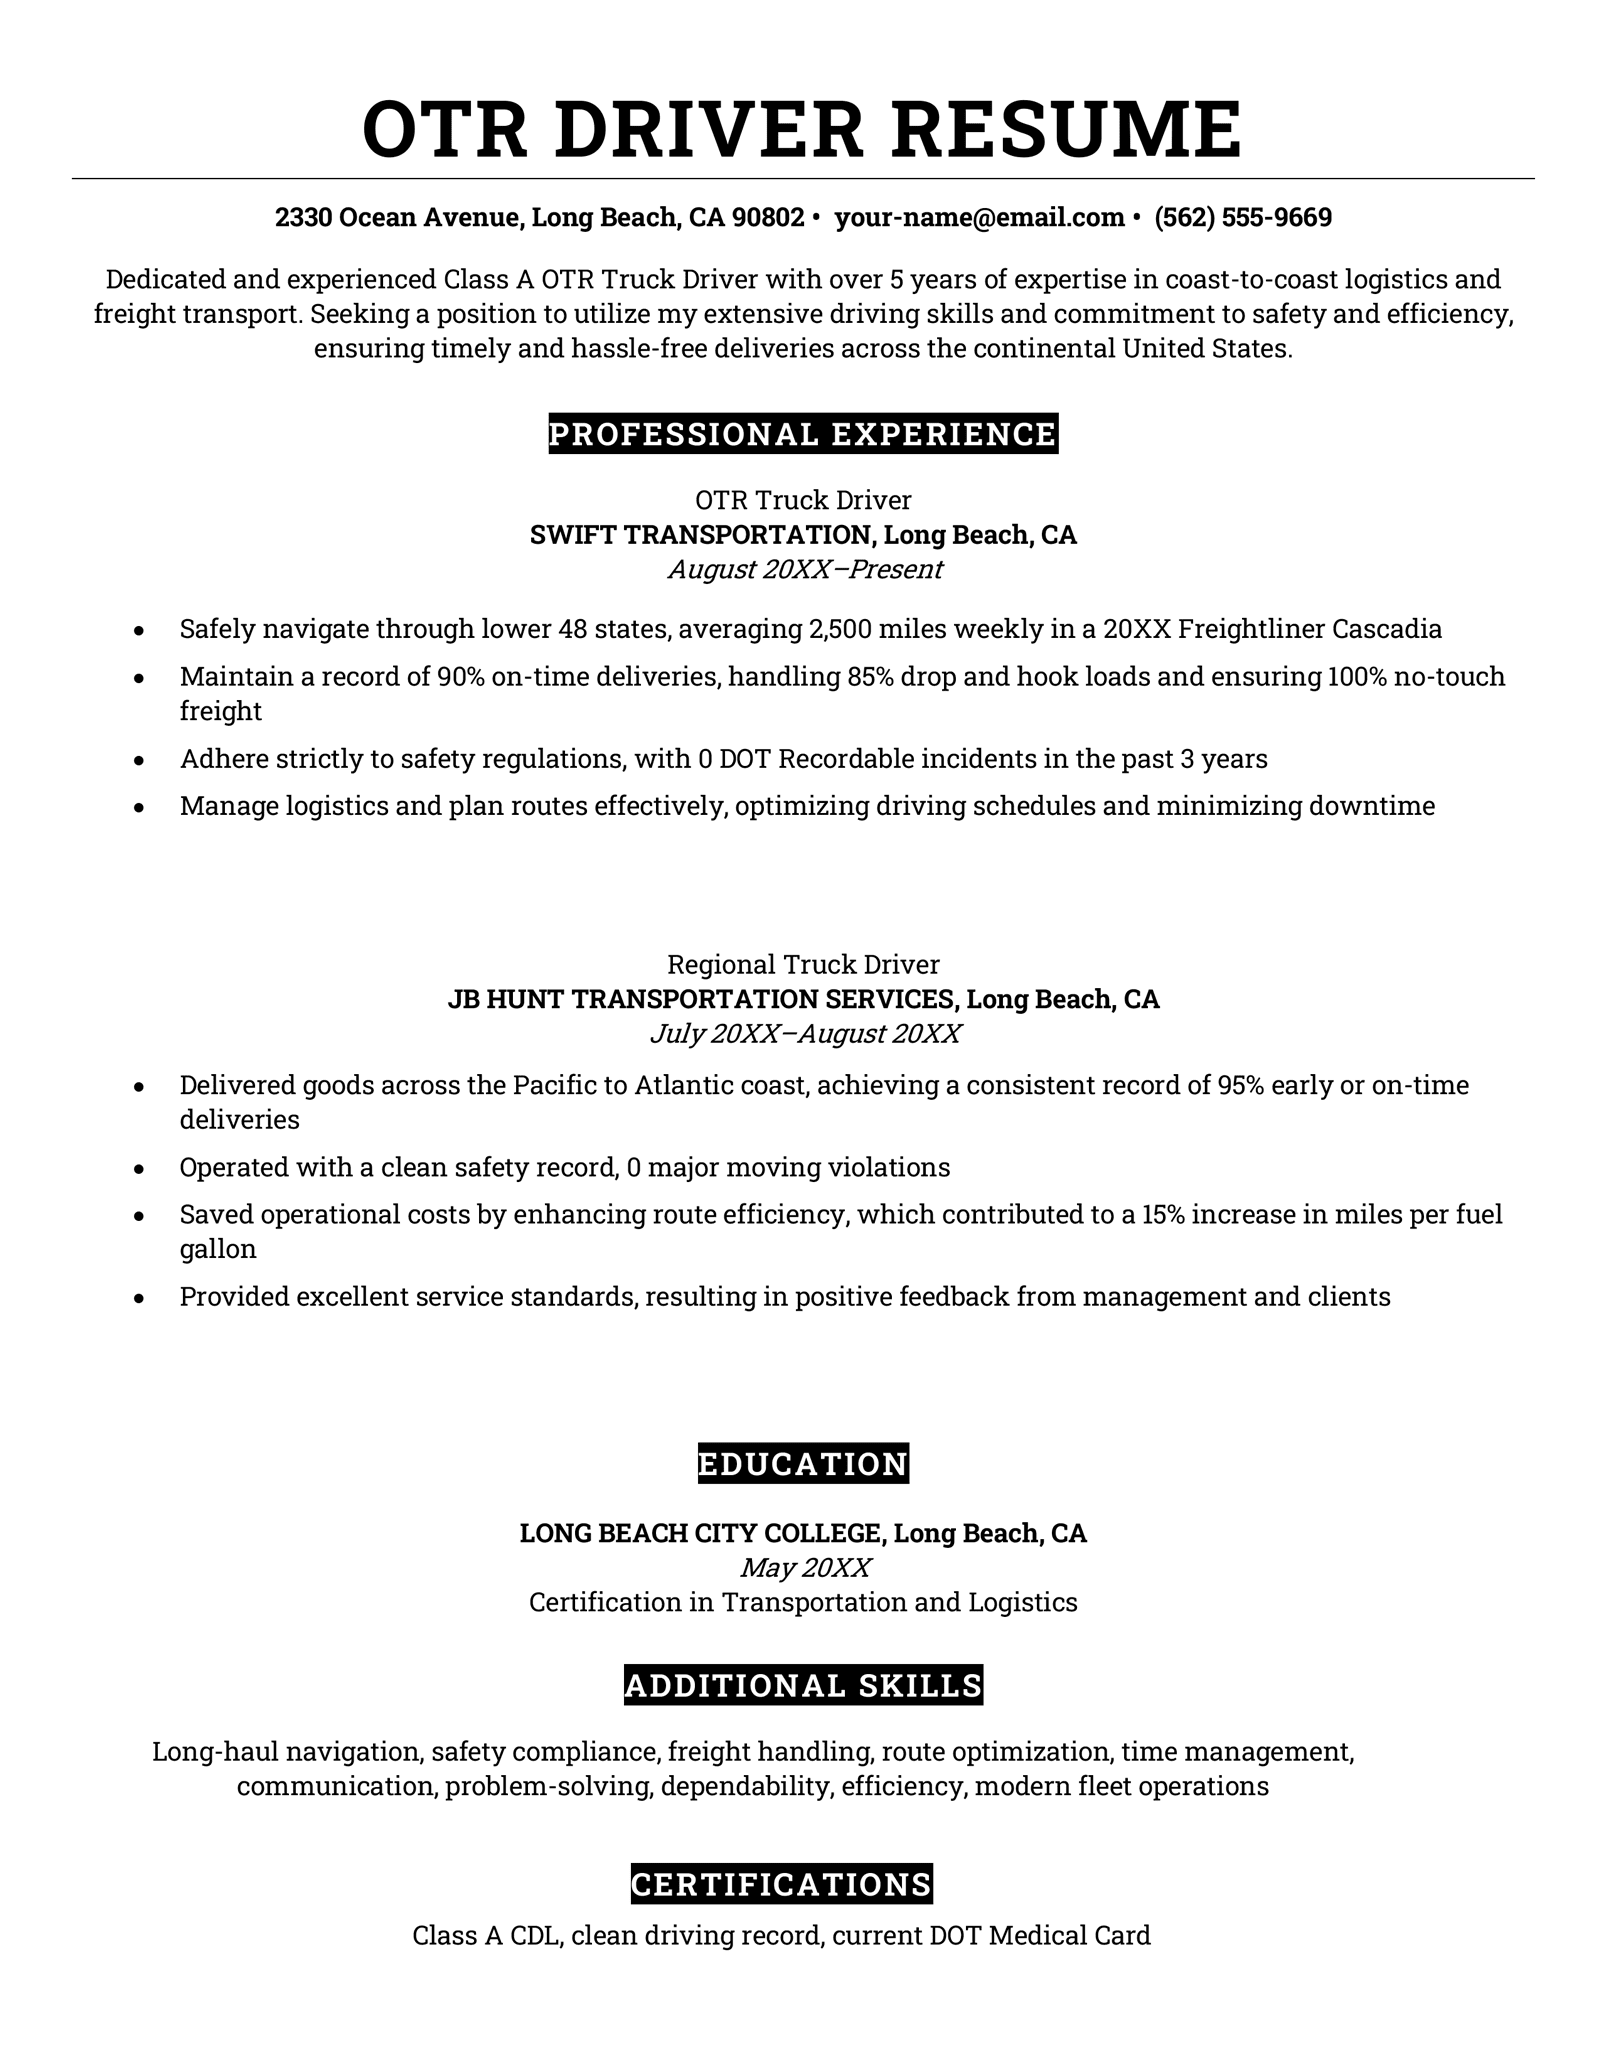 An OTR driver resume that features bold black backgrounds with white text for each section title.